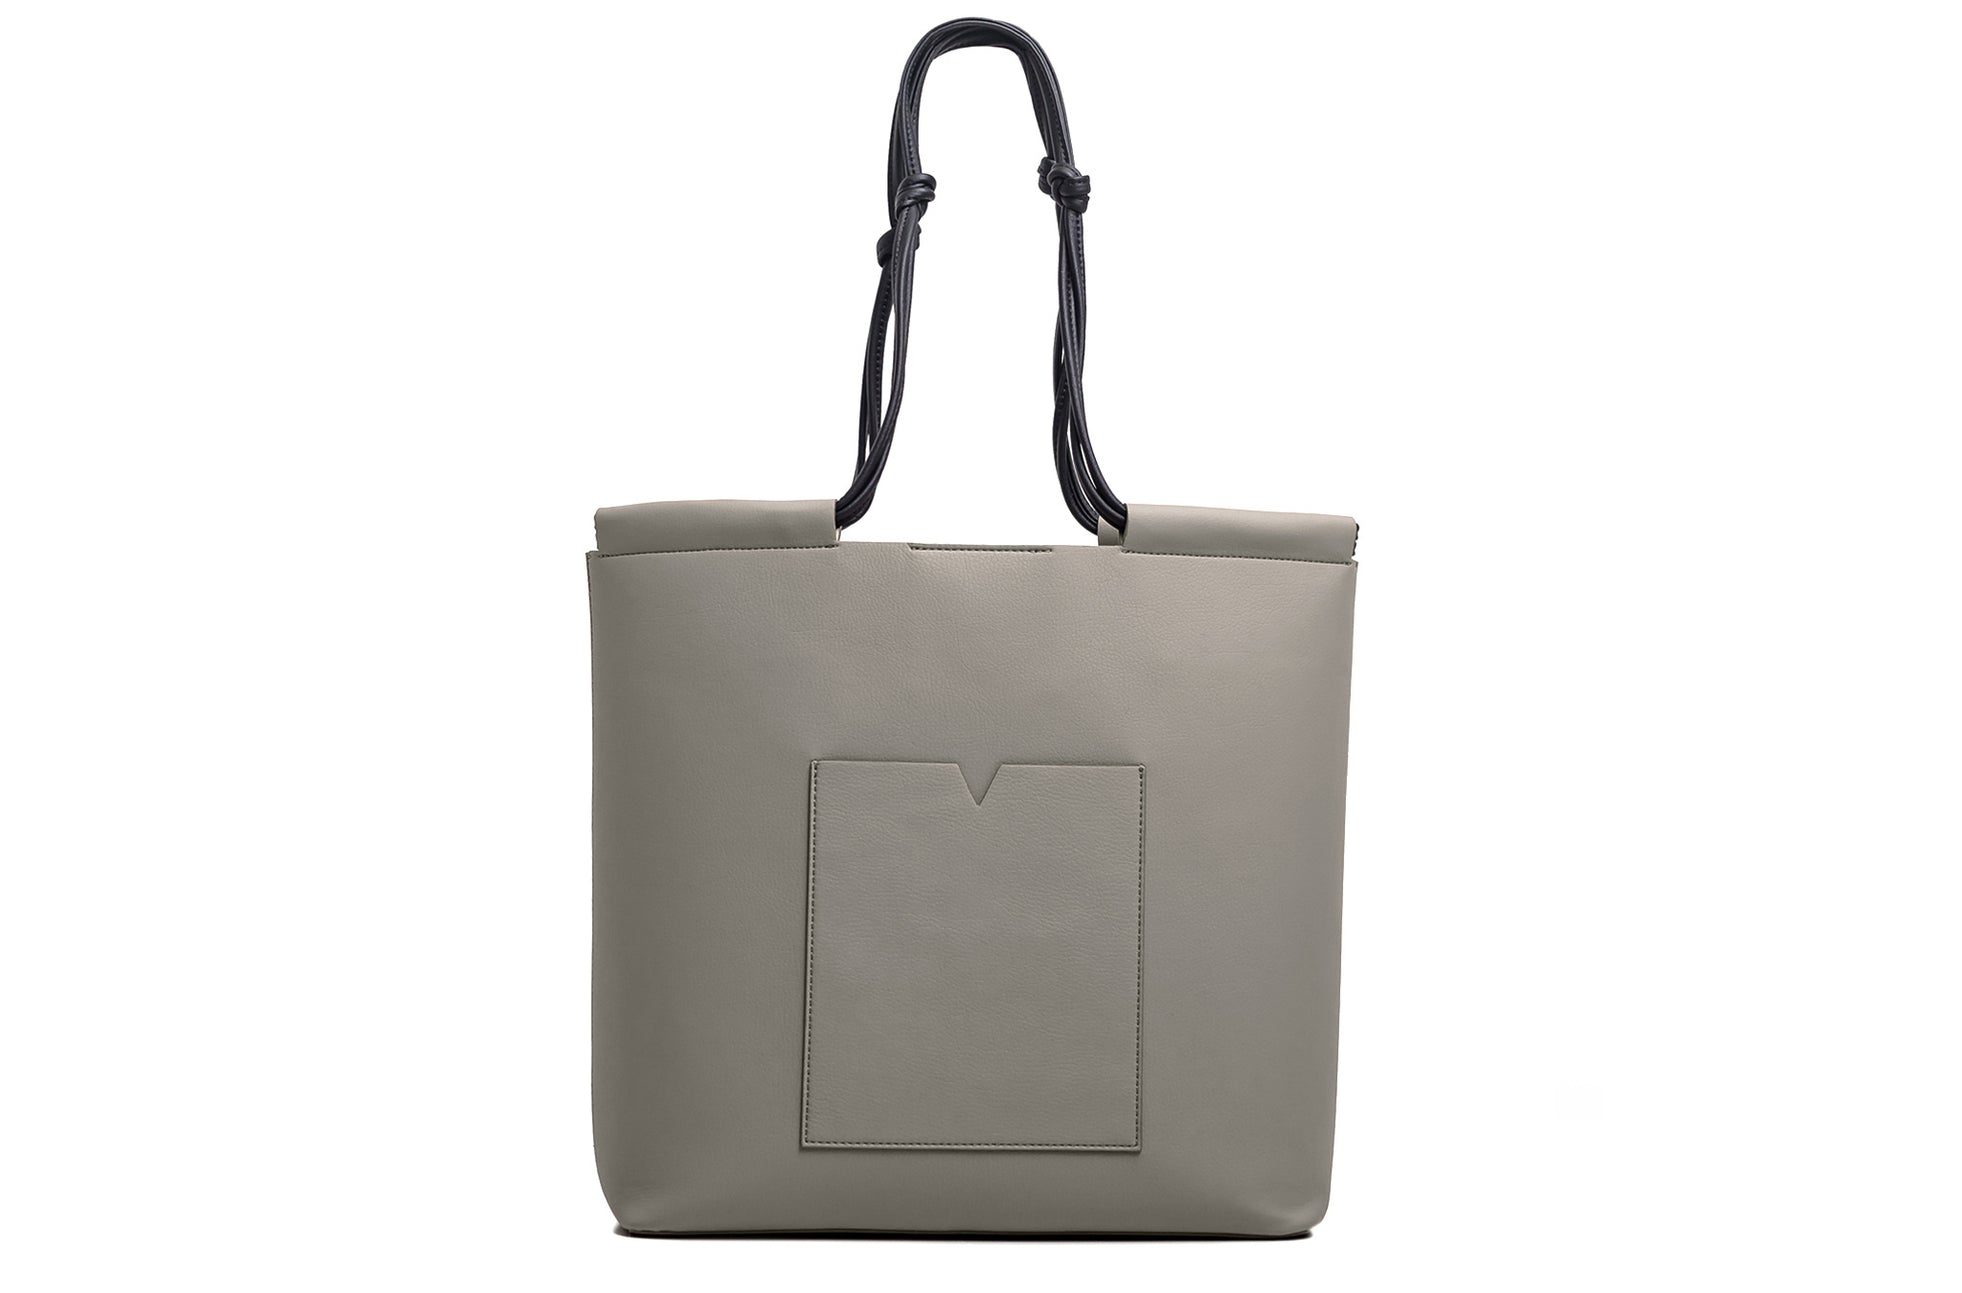 The Market Tote in Technik-Leather in Stone and Black image 1